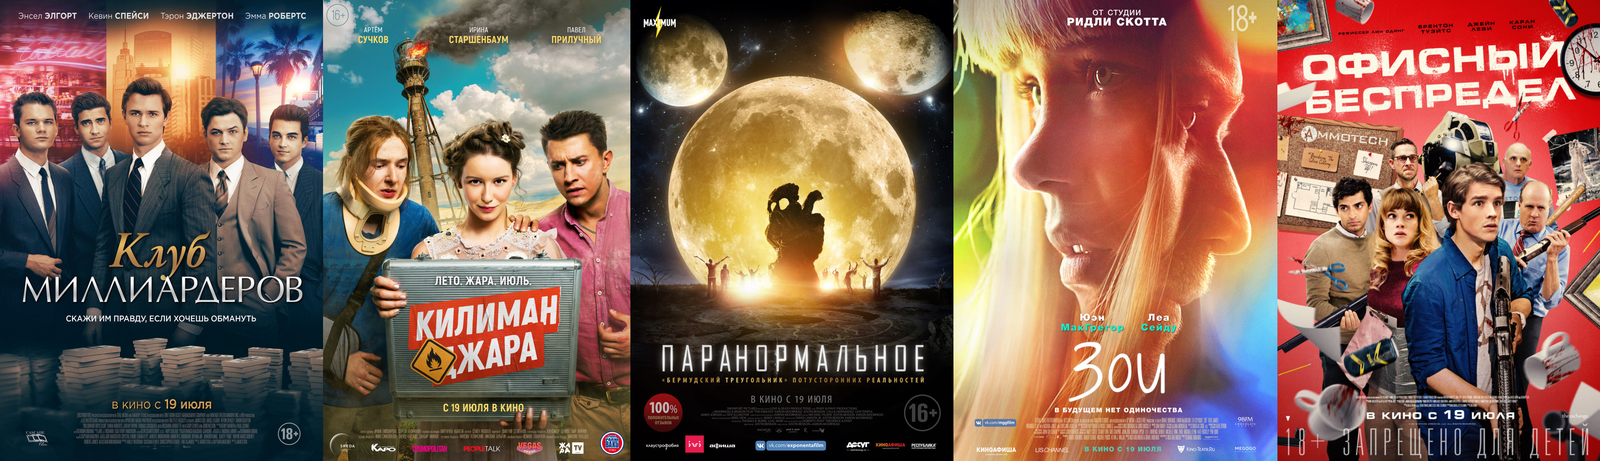 Russian box office receipts and distribution of screenings over the past weekend (July 19 - 22) - Movies, Billionaires Club, Paranormal, Zoe, , Box office fees, Film distribution, 